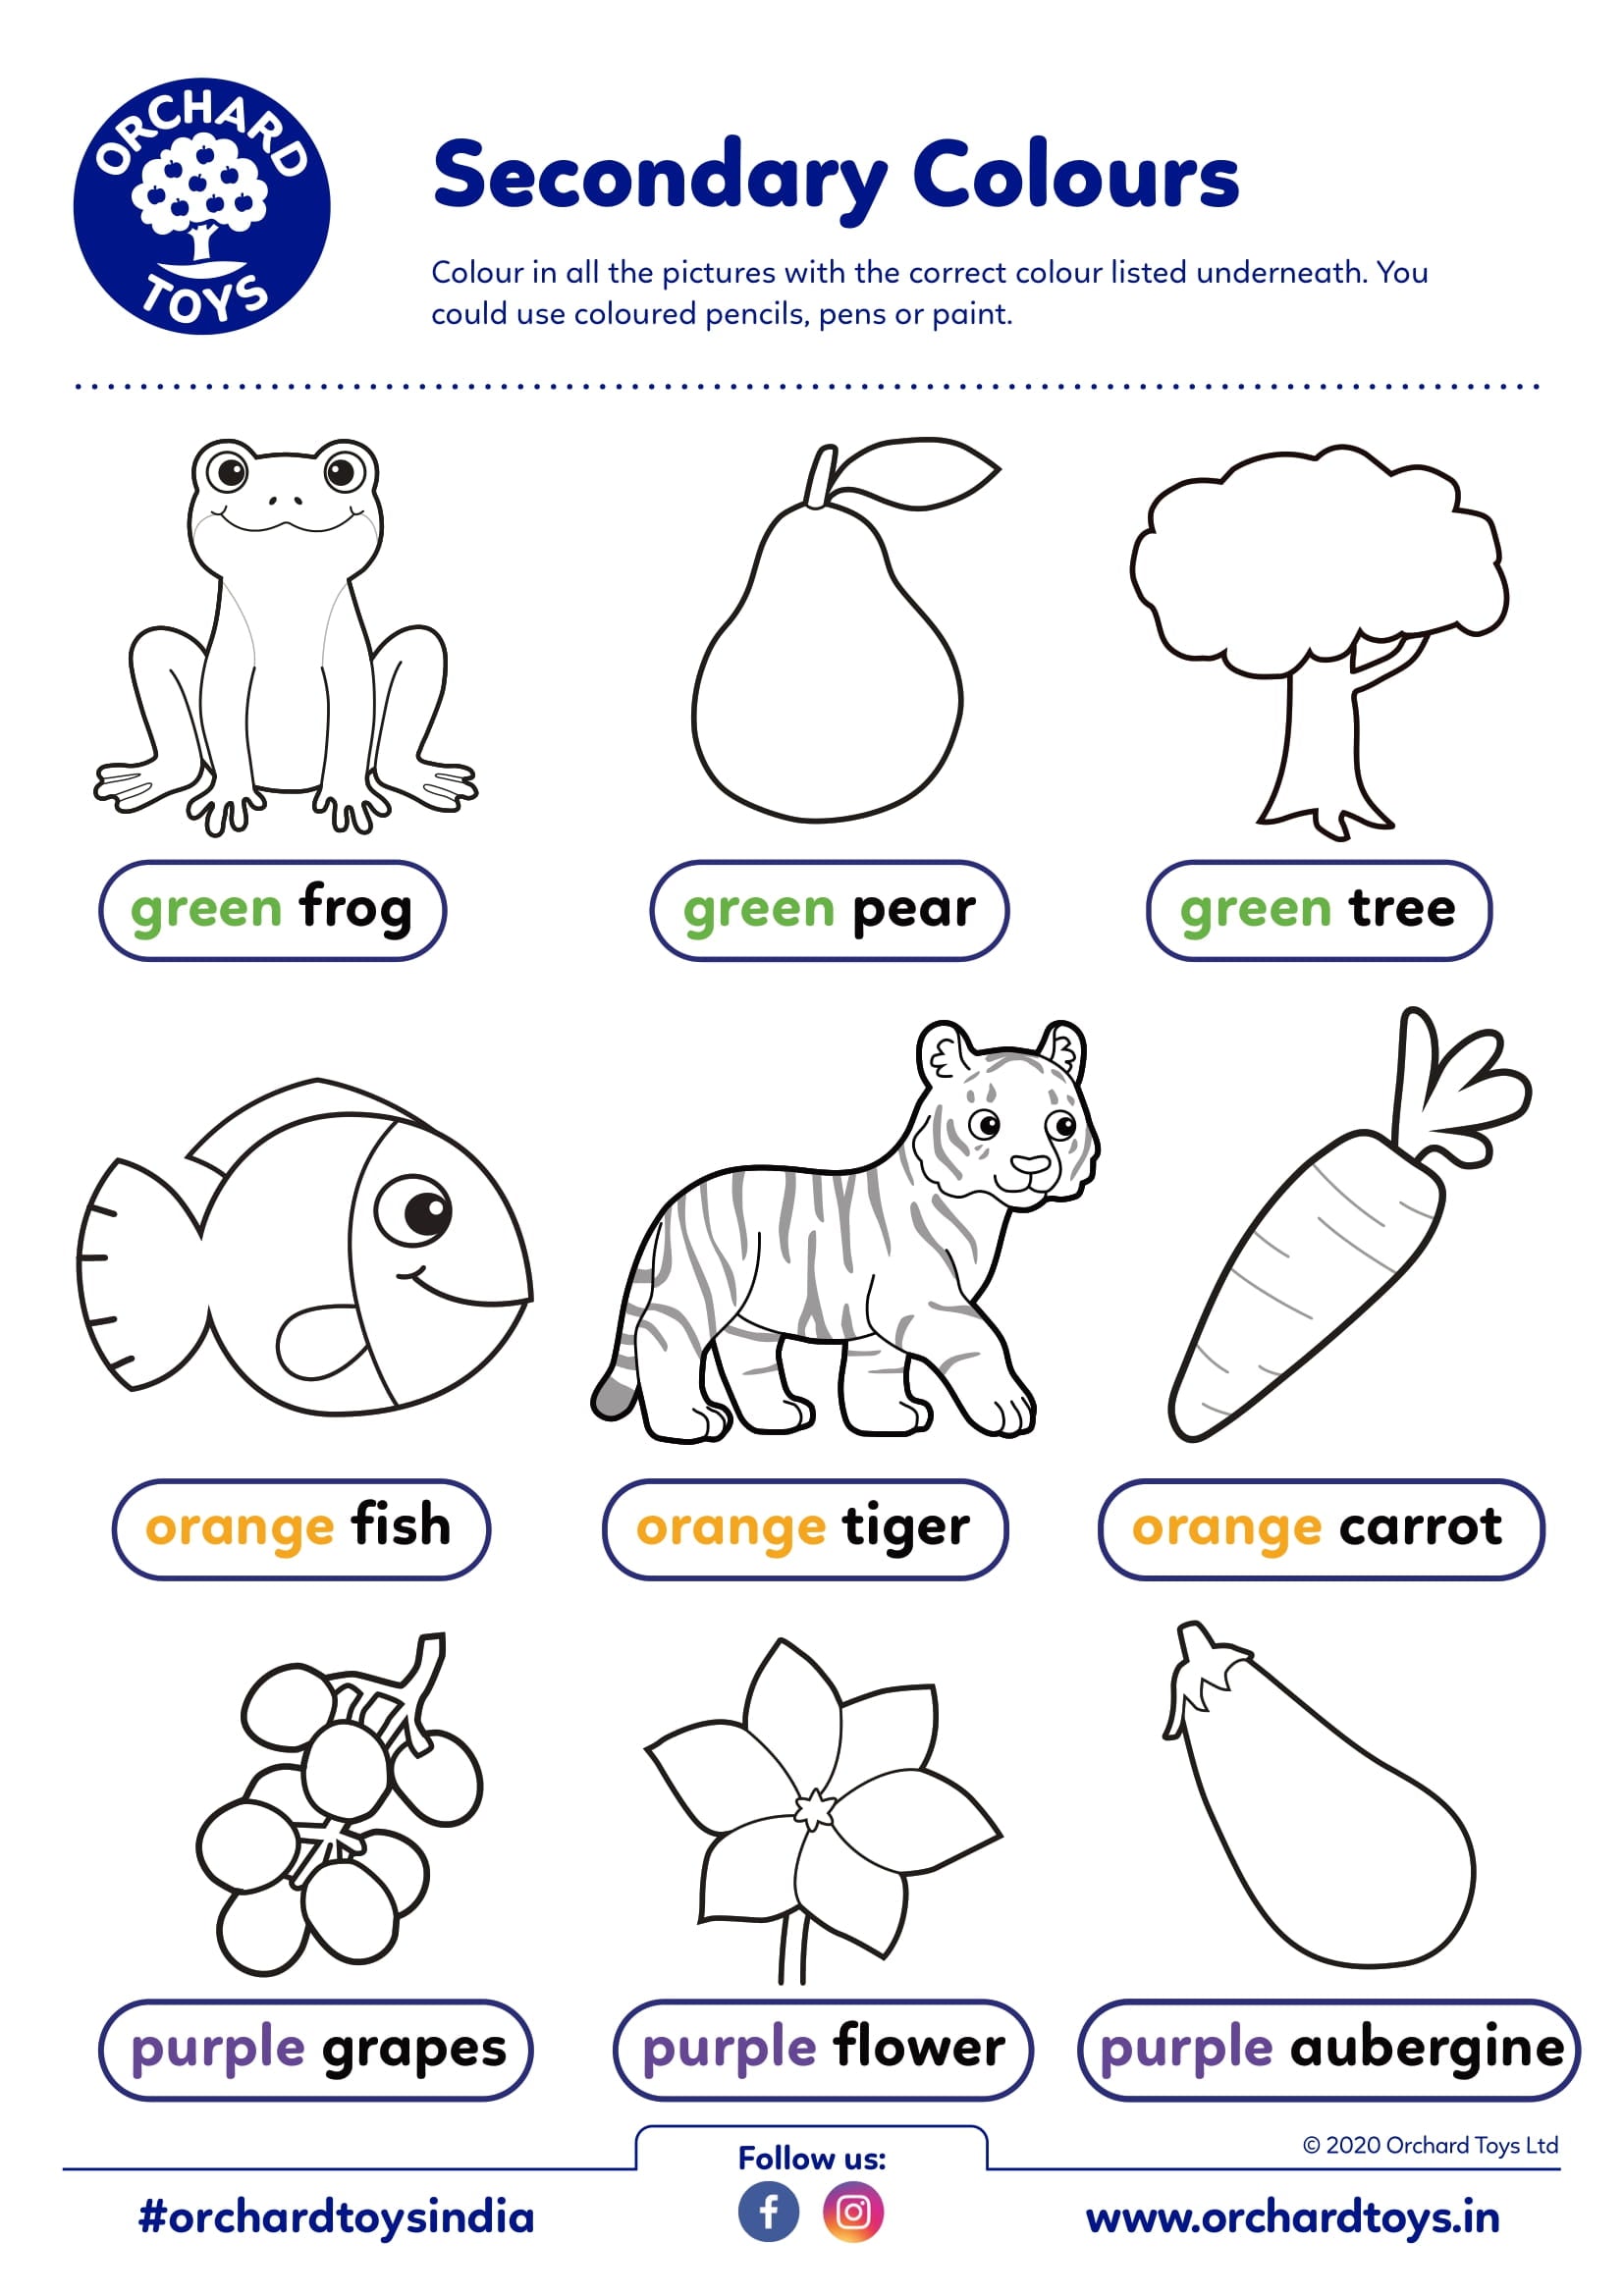 Secondary Colors Activity Sheet